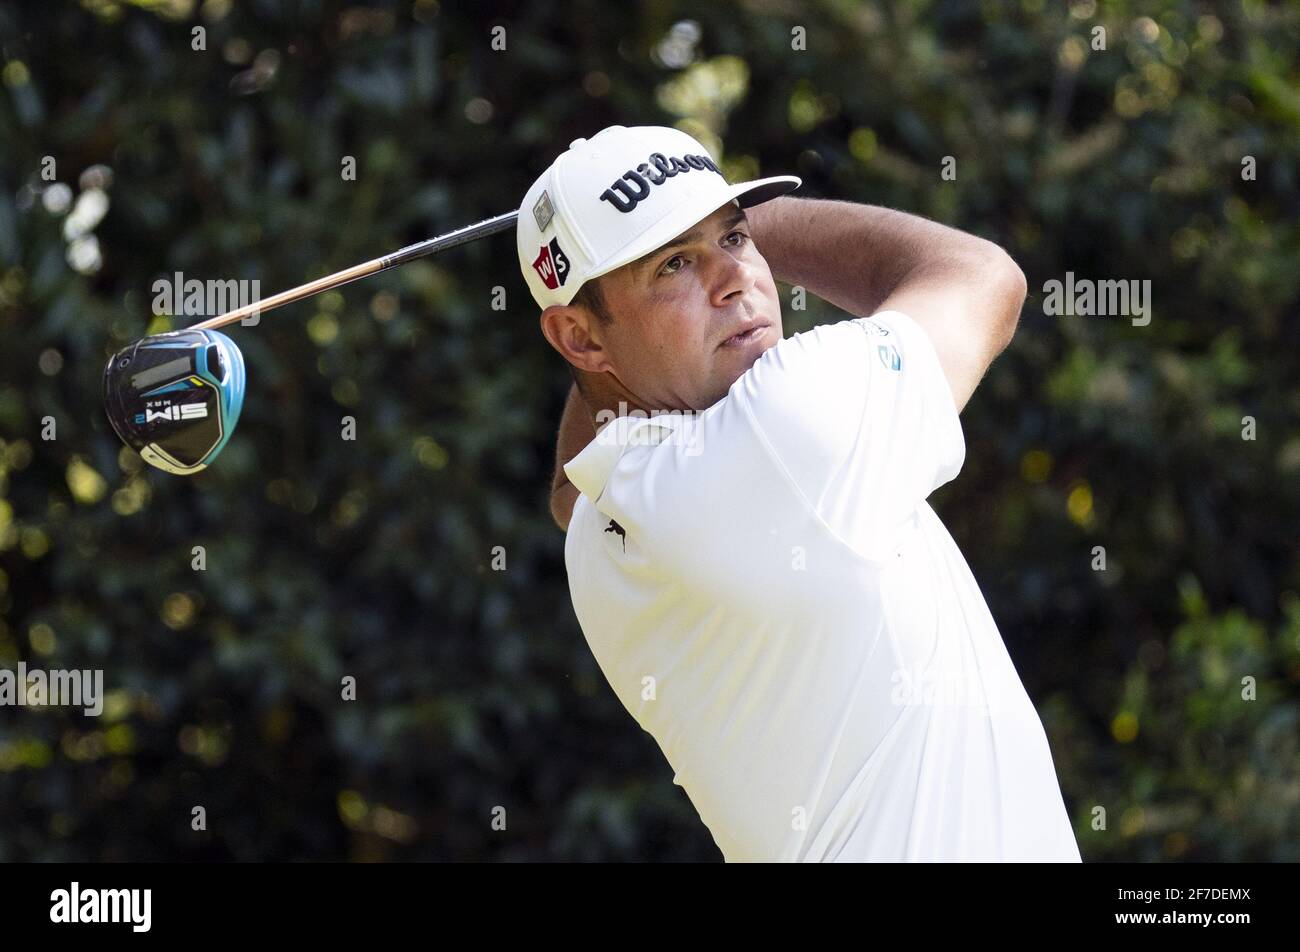 Augusta, United States. 06th Apr, 2021. Gary Woodland participates in a practice round before the start of the 2021 Masters Tournament at Augusta National in Augusta, Georgia on Tuesday, April 6, 2021. The Masters will start on Thursday, April 8th with limited in-person patron attendance. Photo by Kevin Dietsch/UPI Credit: UPI/Alamy Live News Stock Photo